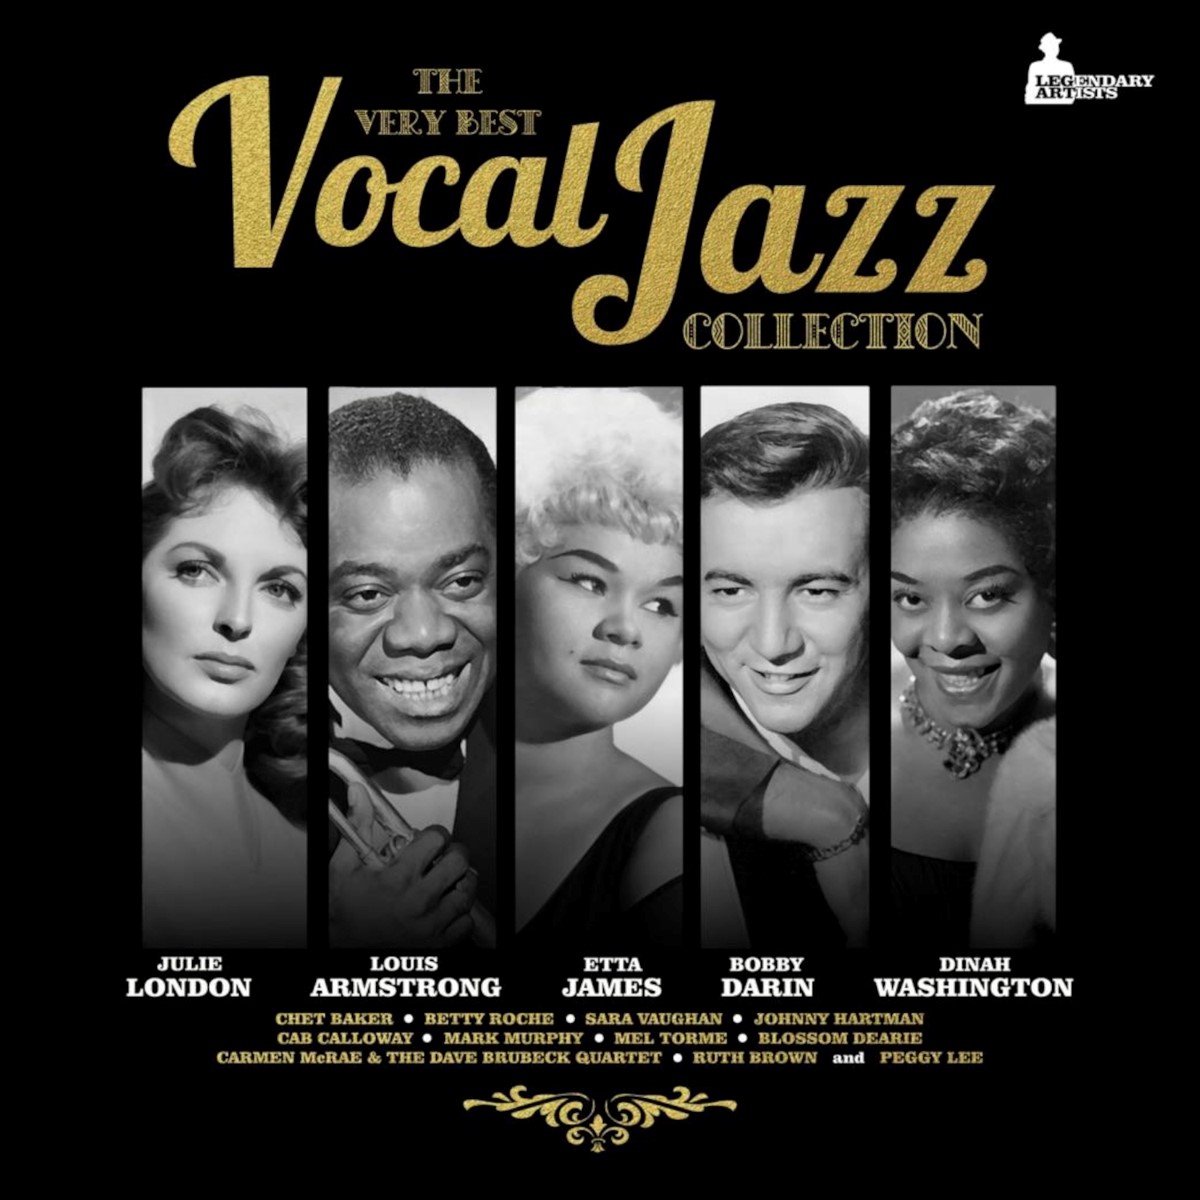 Various Artists - The Very Best Vocal Jazz Collection (LP) - various artists